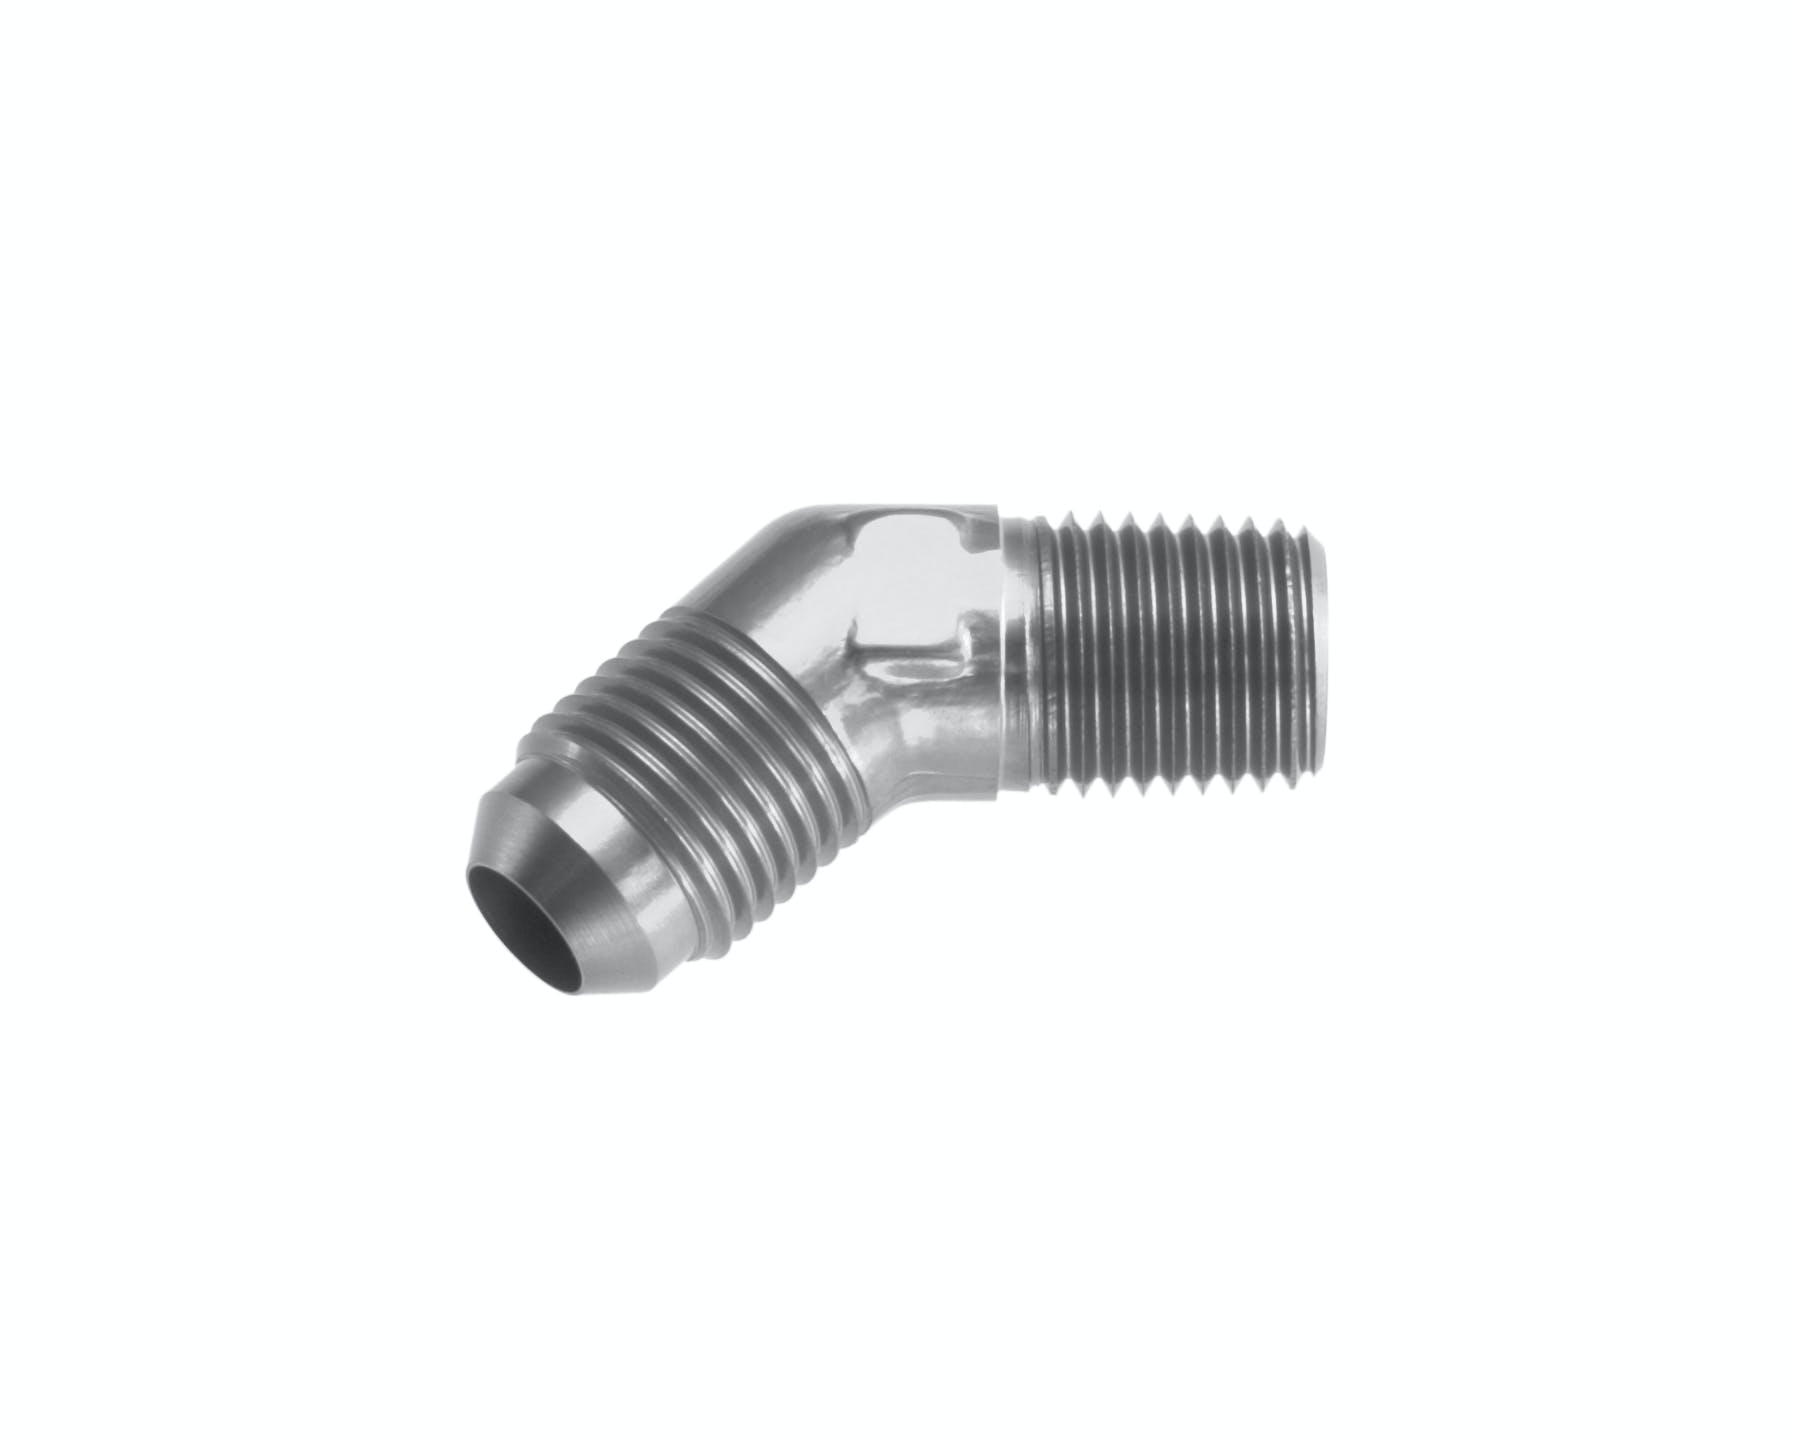 Redhorse Performance 823-06-02-5 -06 45 degree Male adapter to -02 (1/8in) NPT Male - clear